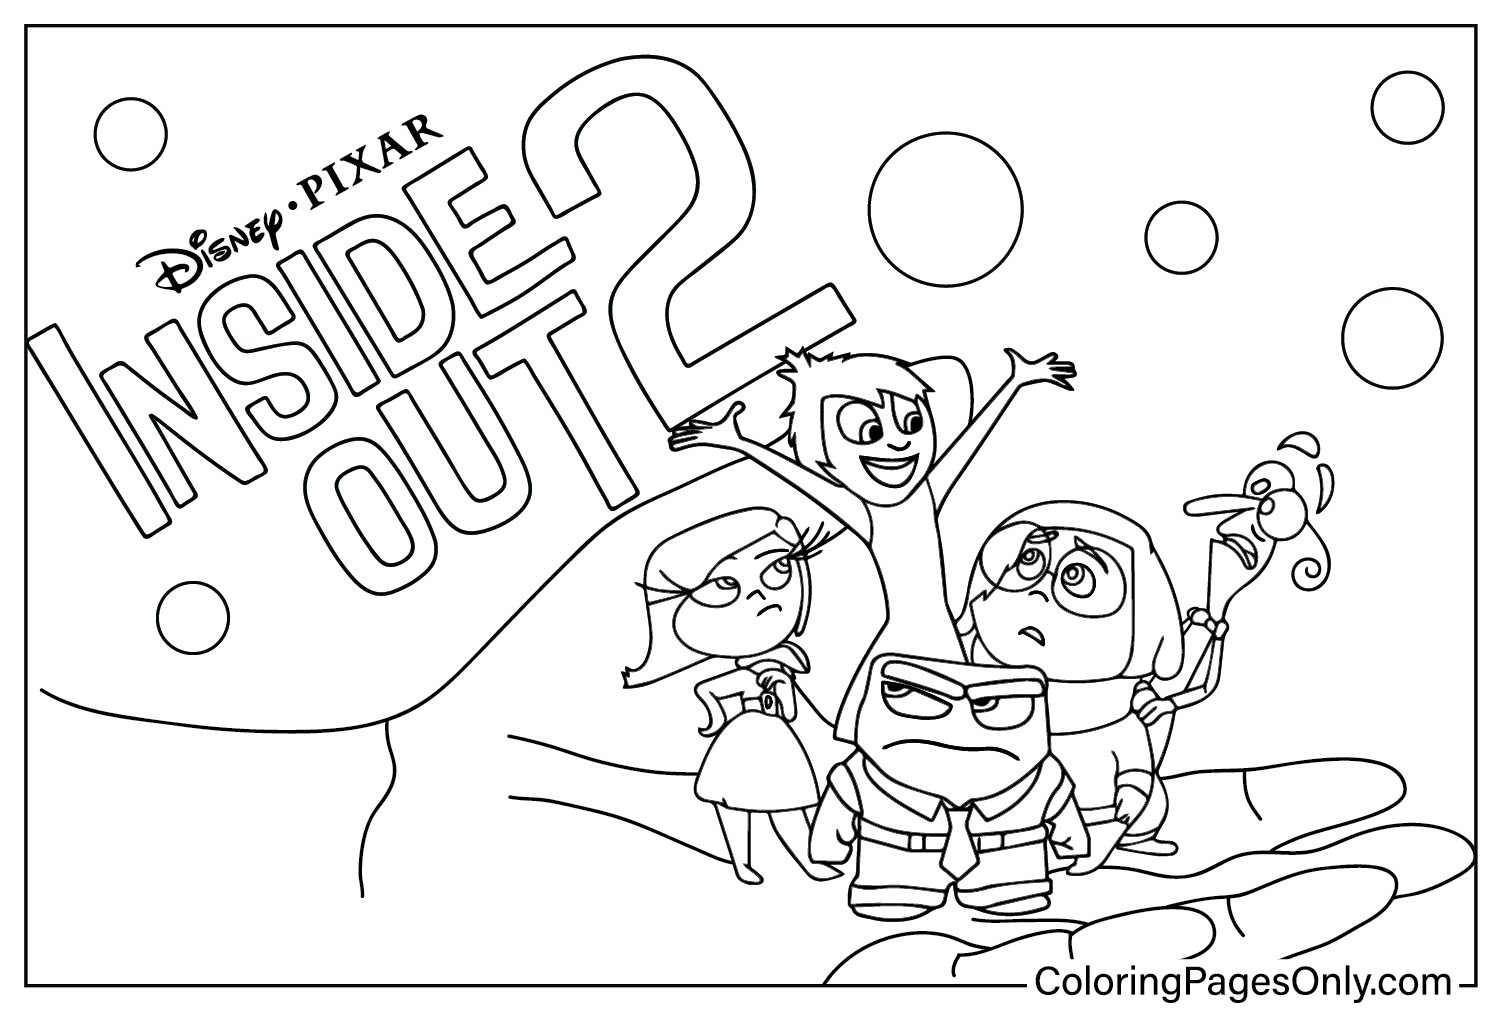 Coloring Page Inside Out 2 - Free Printable Coloring Pages